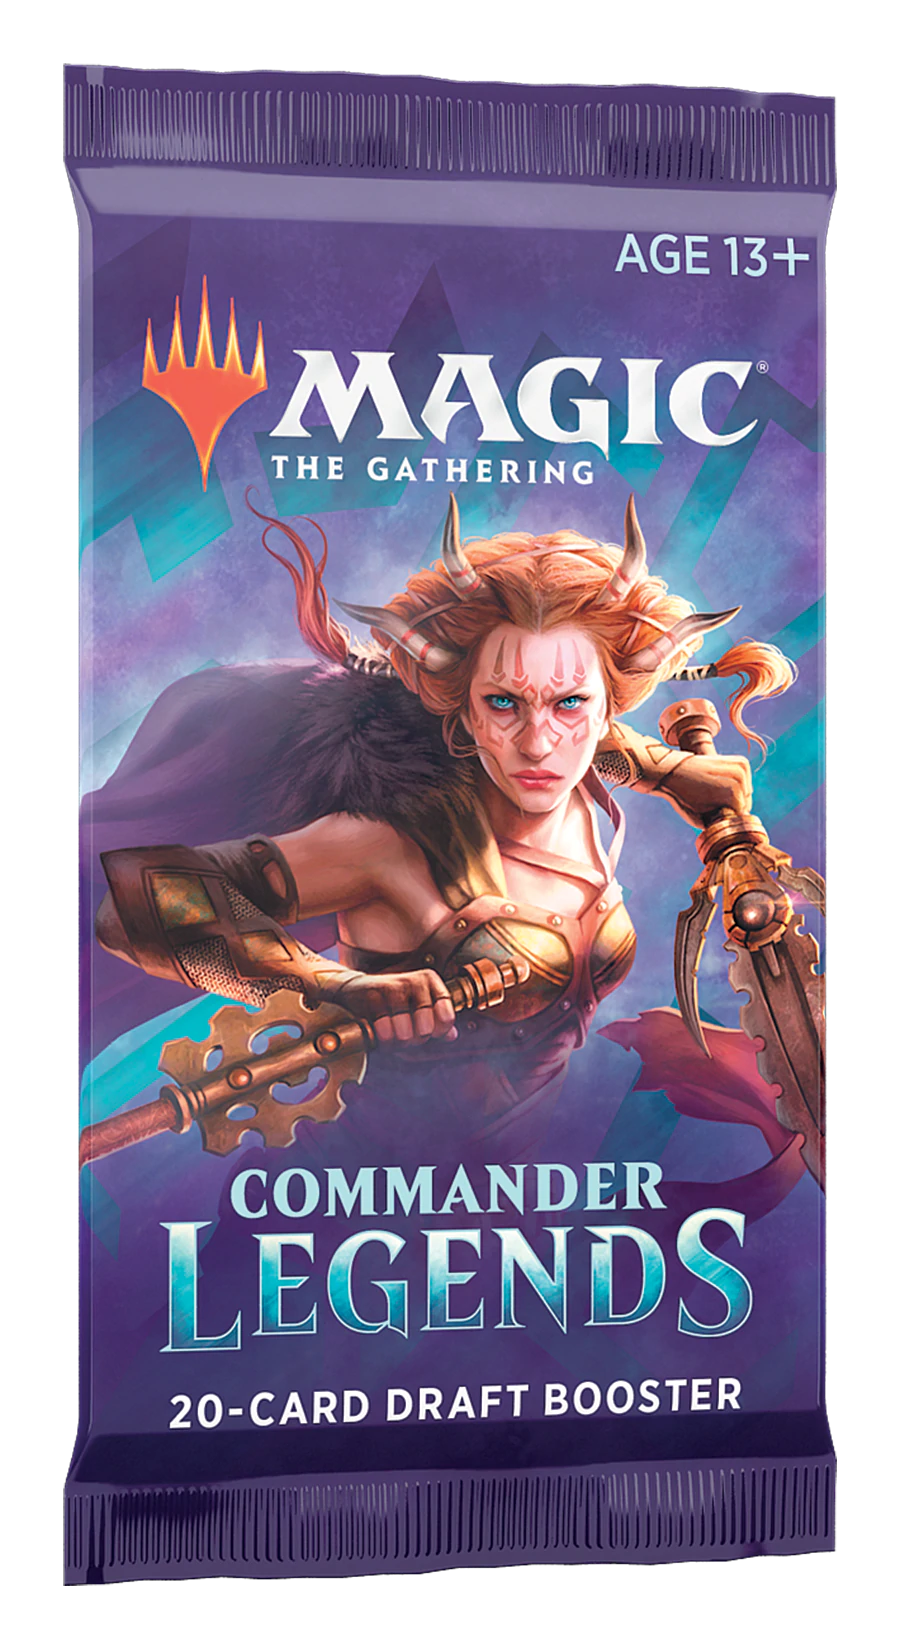 Magic the Gathering: Commander Legends - Draft Booster Packs & Boxes